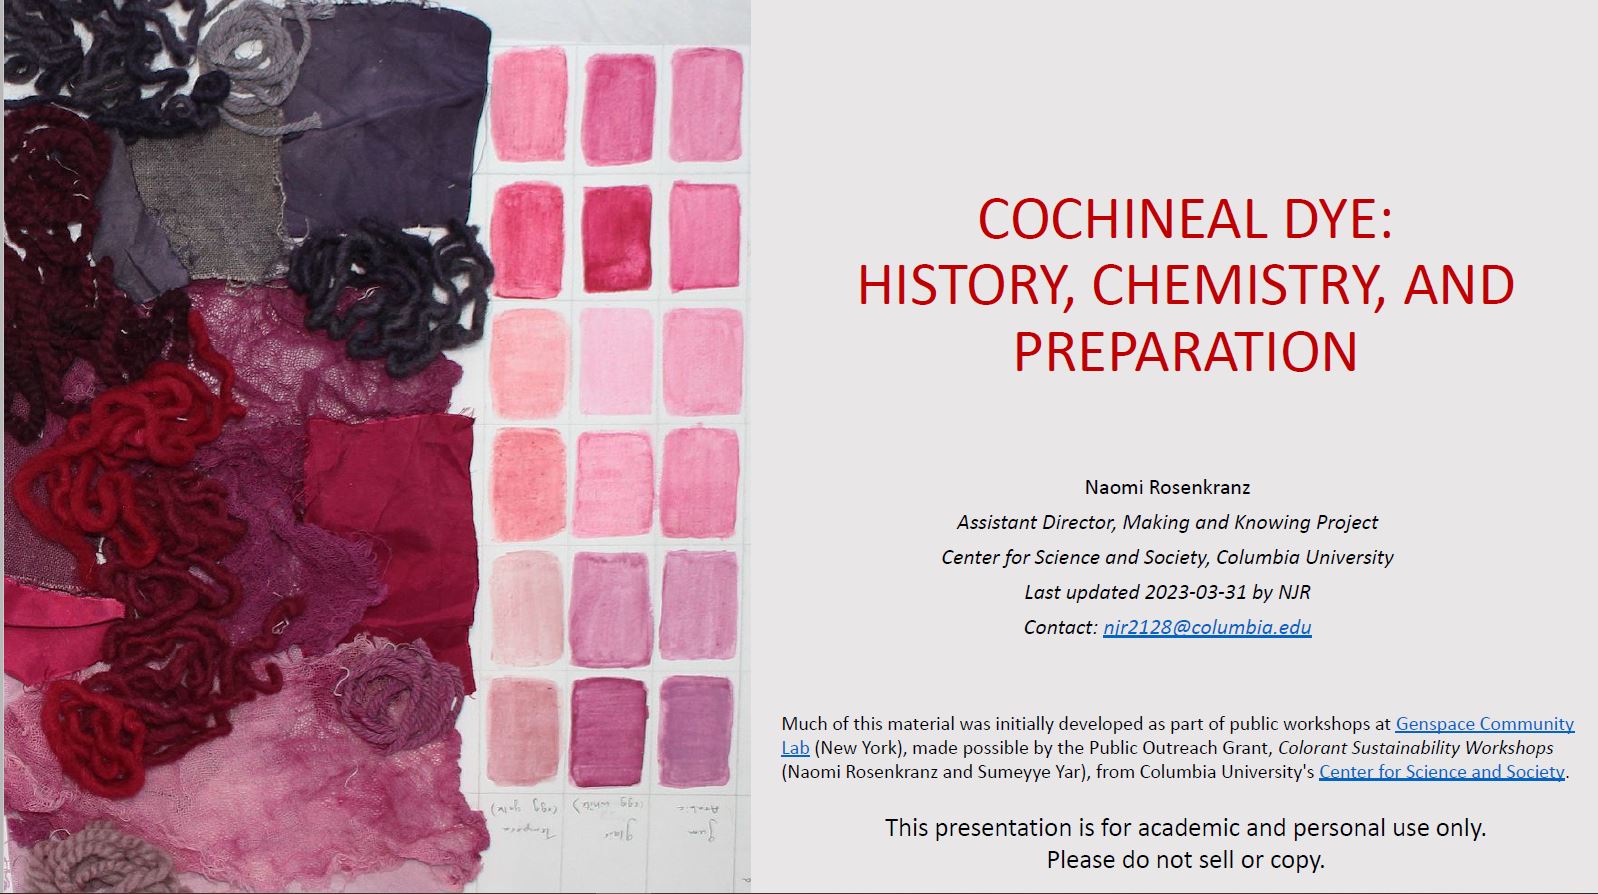 Presentation: Cochineal Dye: History, Chemistry, and Preparation